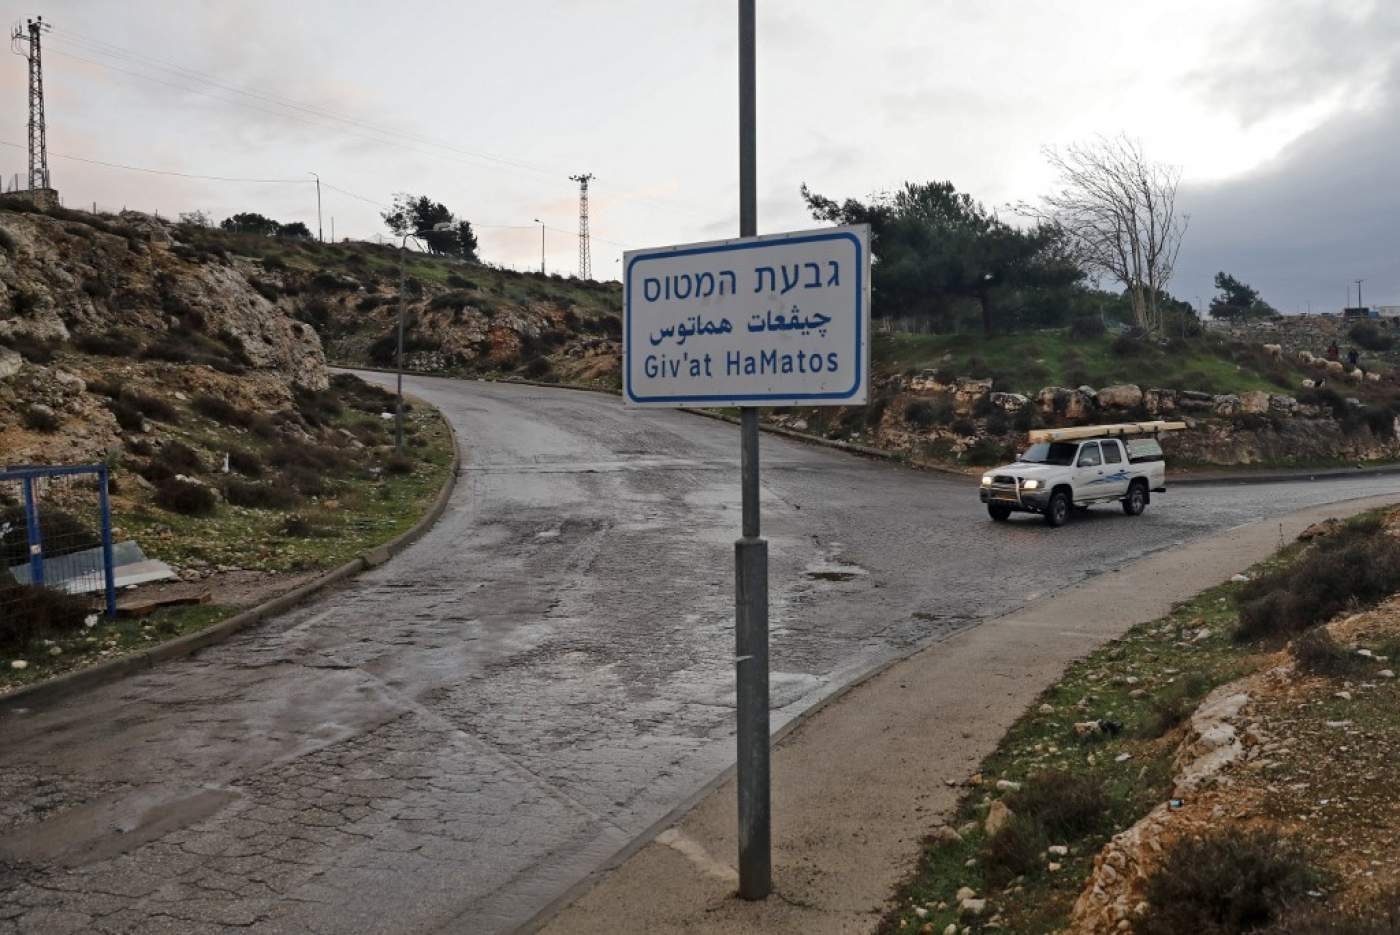 A car advances on a road, by a street placard signaling entry into Givat Hamatos, an Israeli settlement suburb of annexed east Jerusalem, 15 November 2020 (AFP)